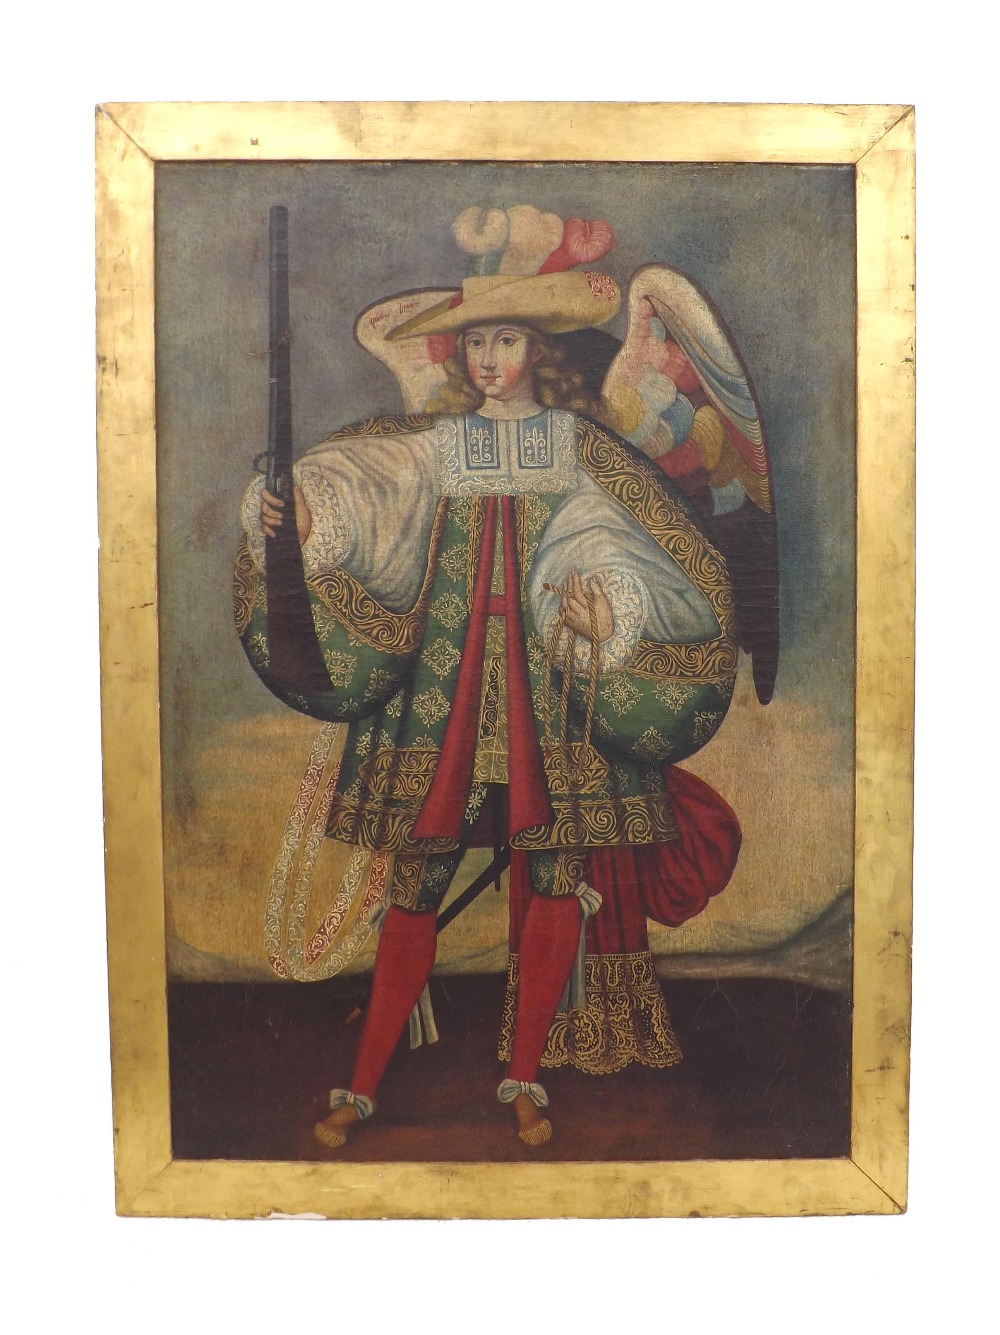 Cuzcos School - Winged figure of a man, wearing an elaborate embroidered costume with red stockings, - Image 2 of 2